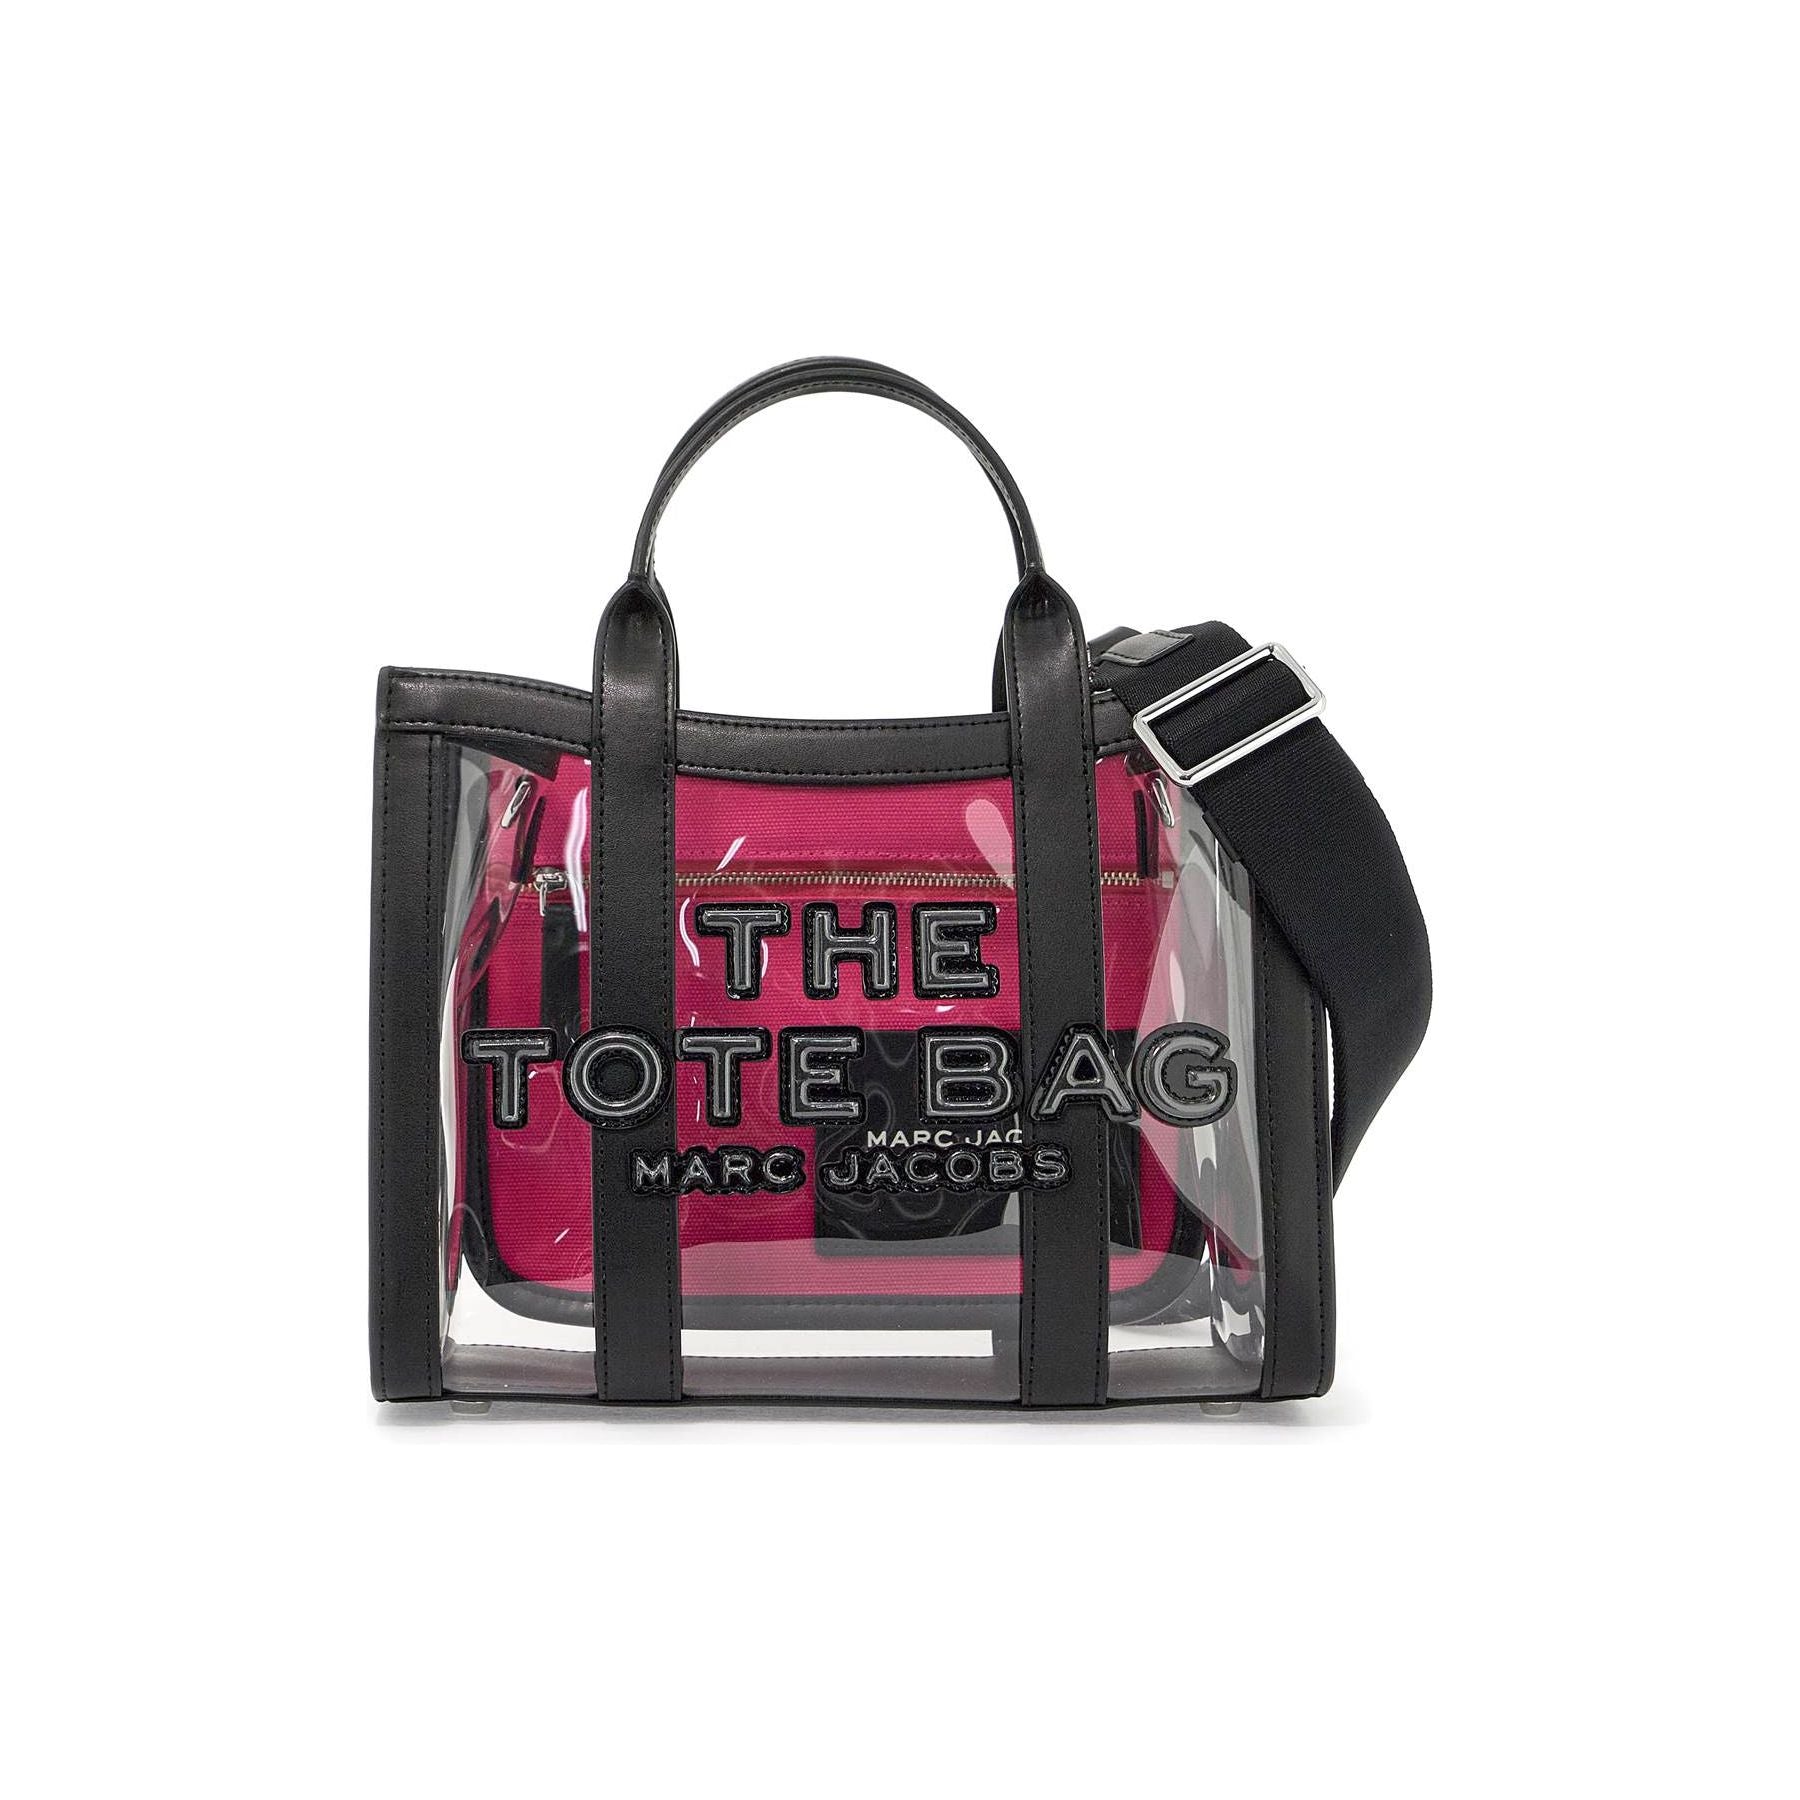 The Clear Small Tote Bag B